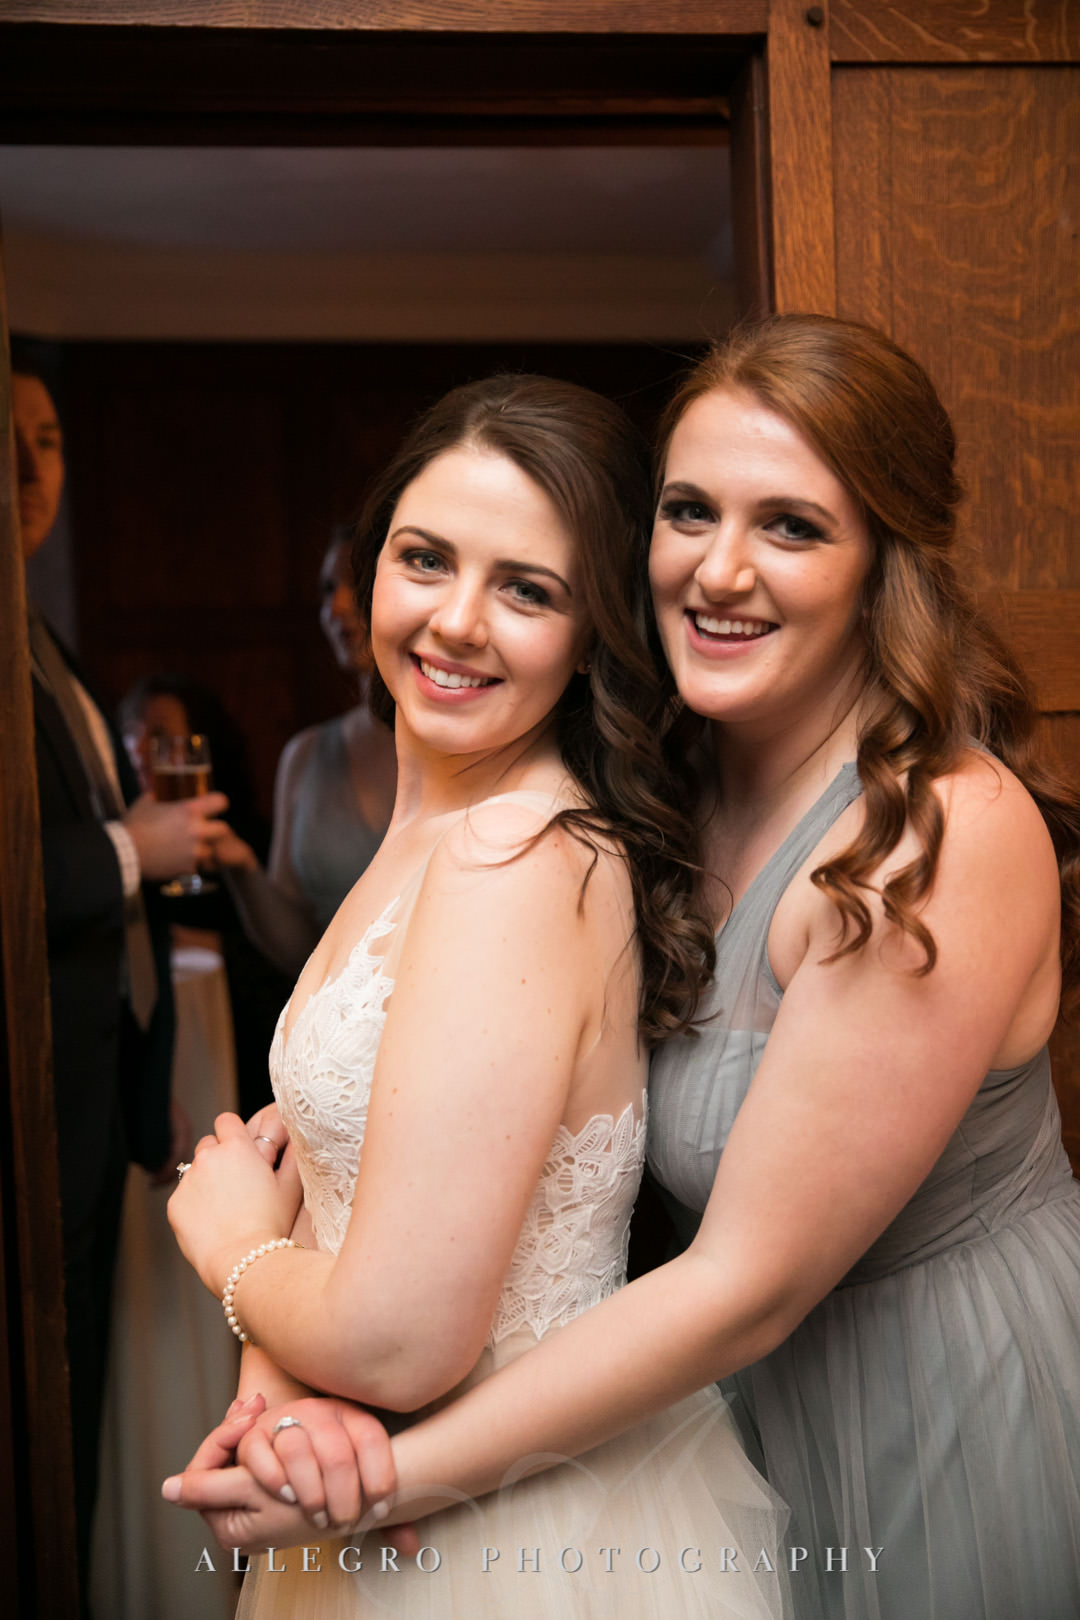 Bride poses with her maid of honor